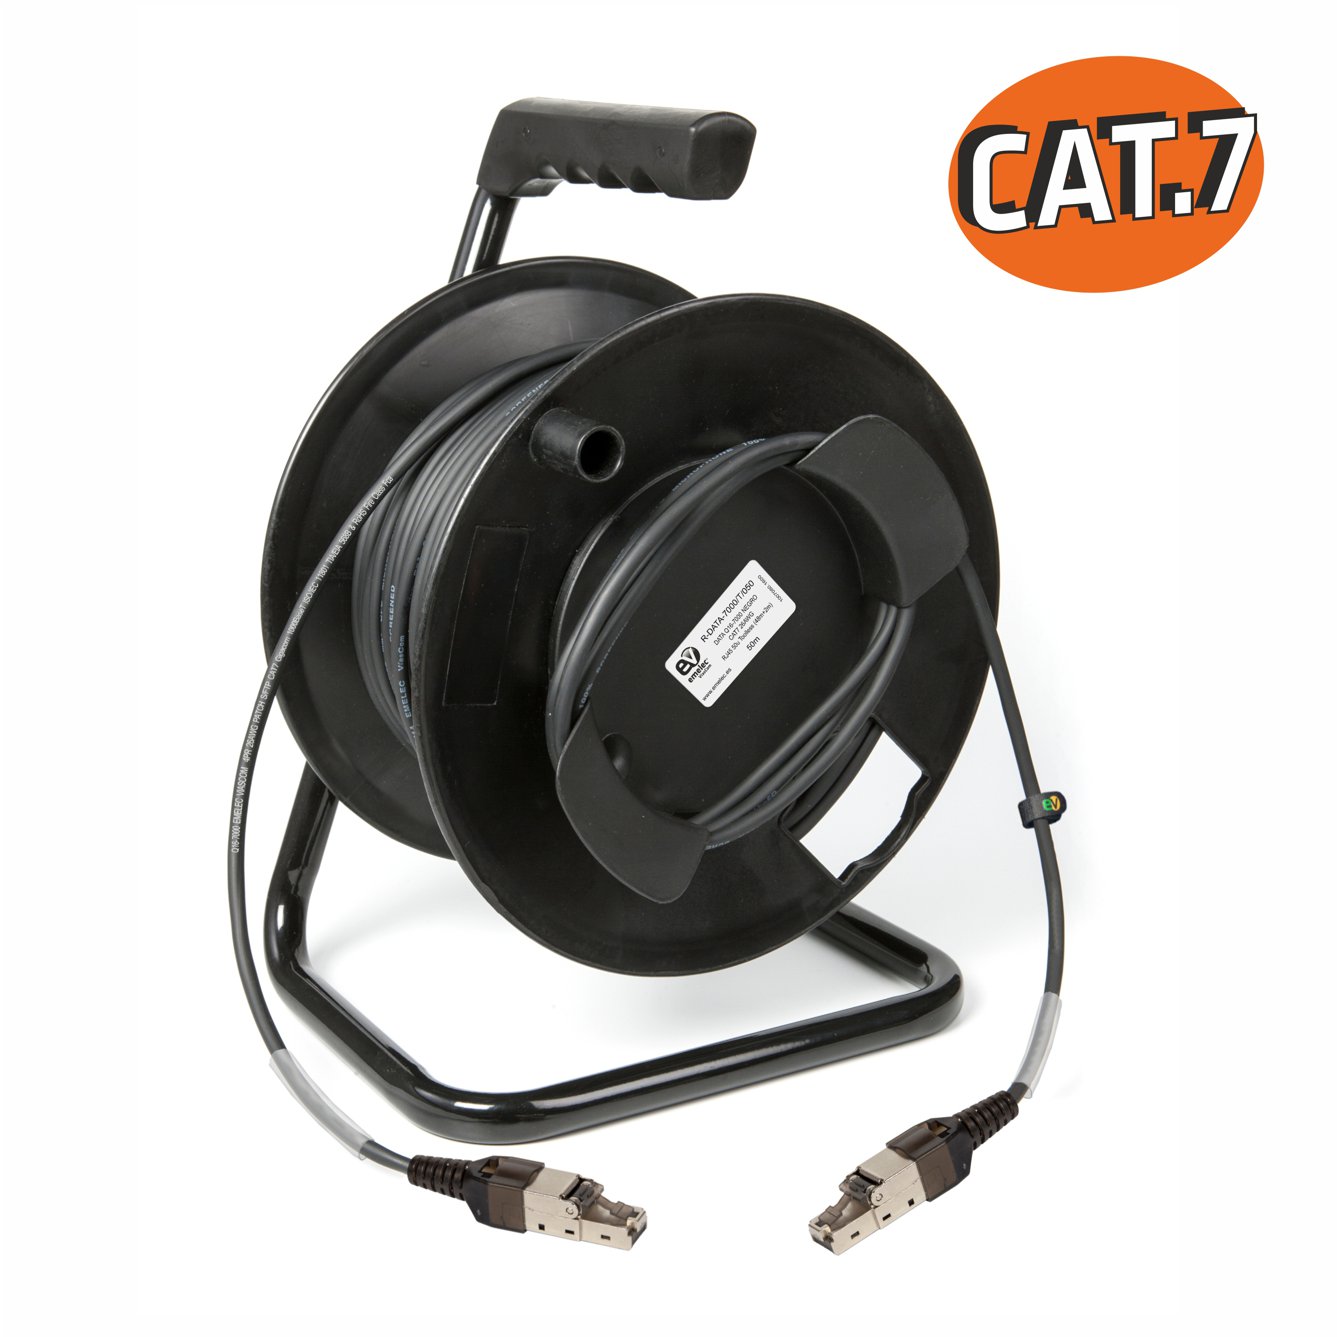 Cat7 cable